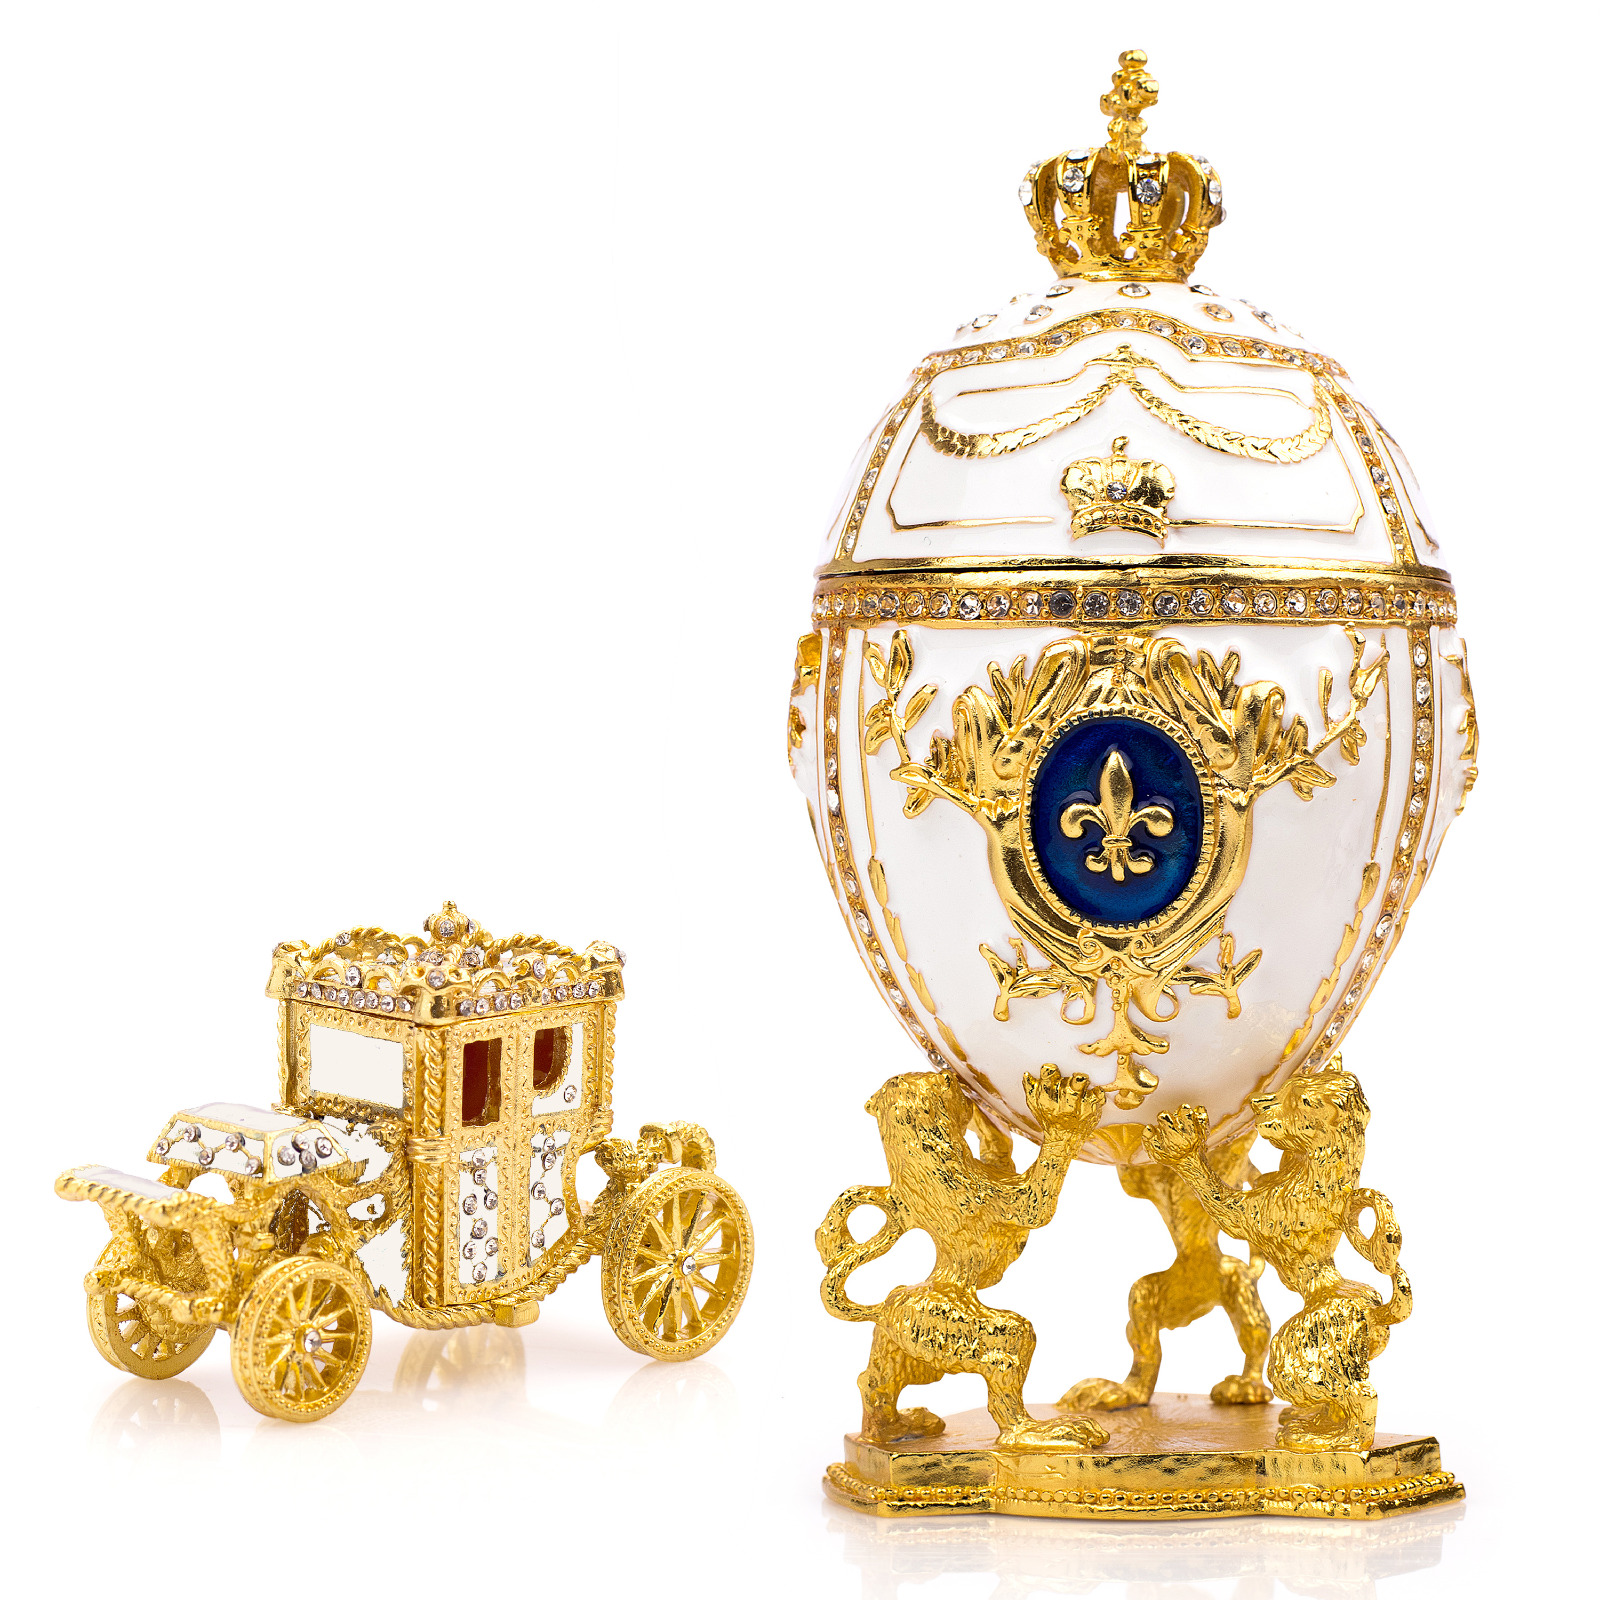 Royal Imperial White Faberge Egg Replica : 6.6 inch + White Carriage by Vtry